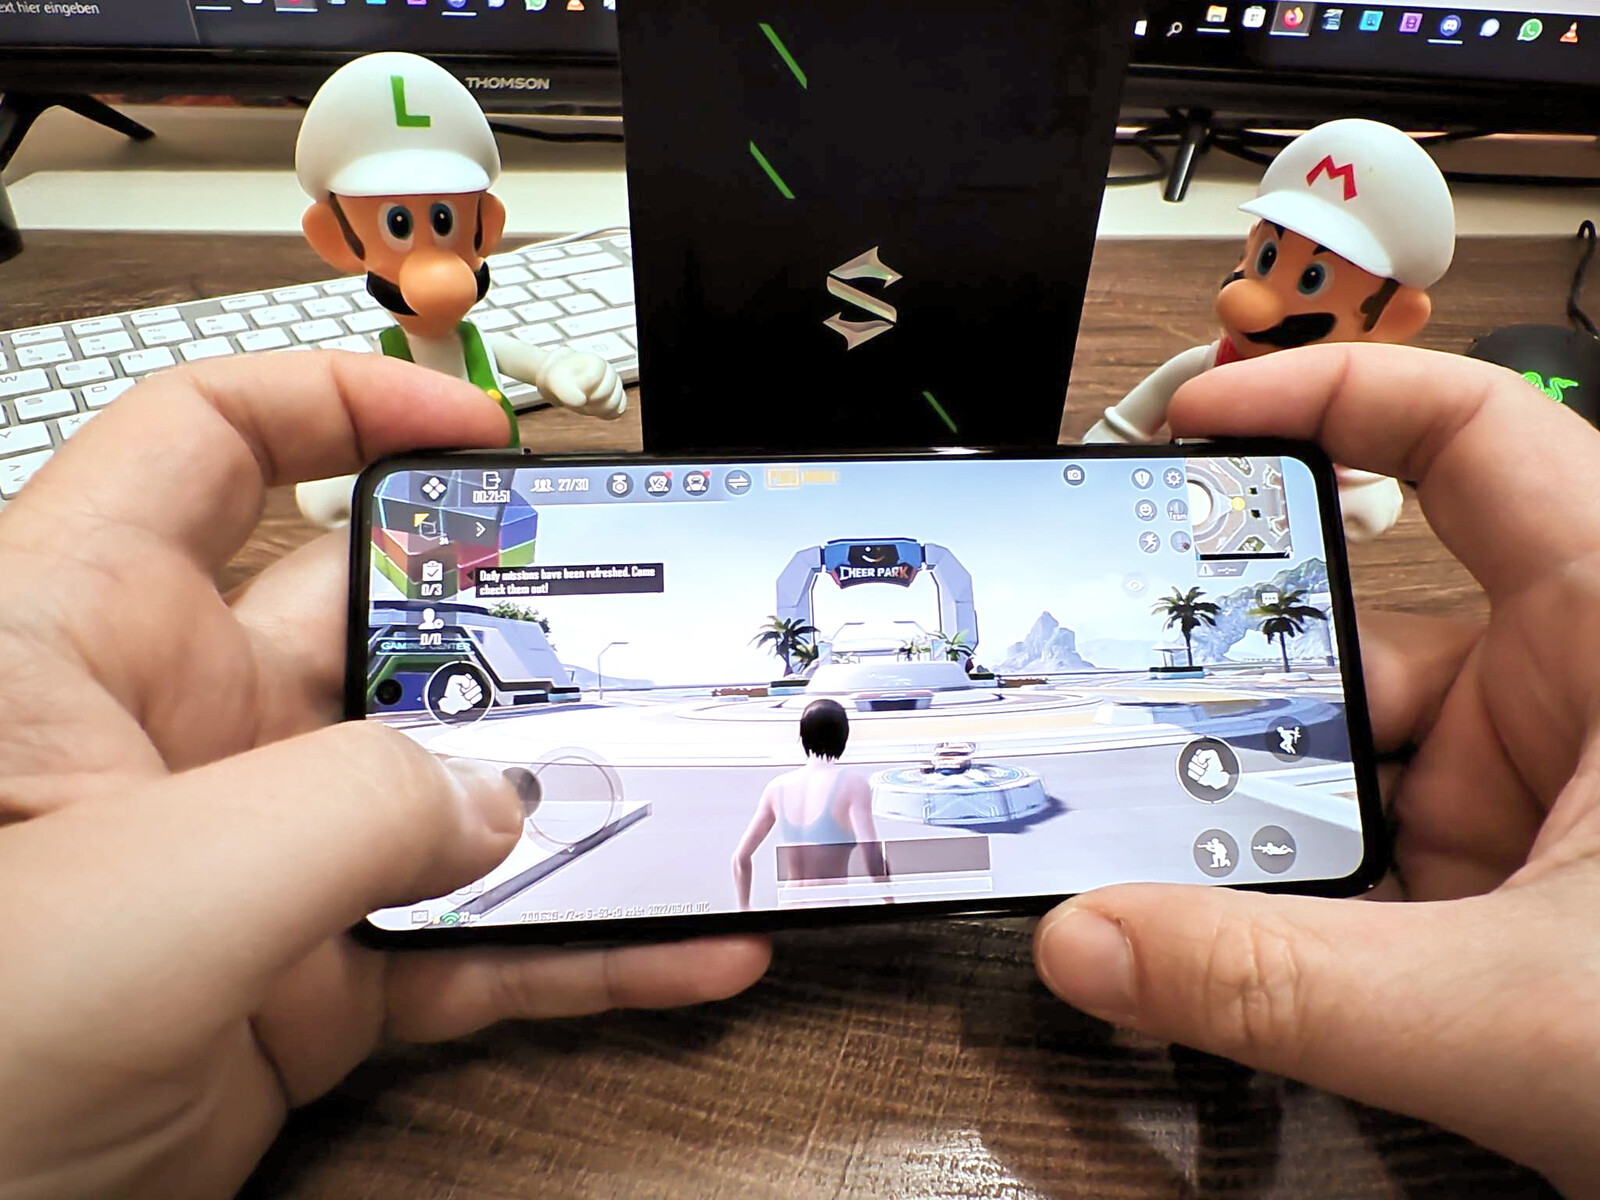 Black Shark 5 Pro review: This gaming phone helps you win all your Apex  Legends Mobile games